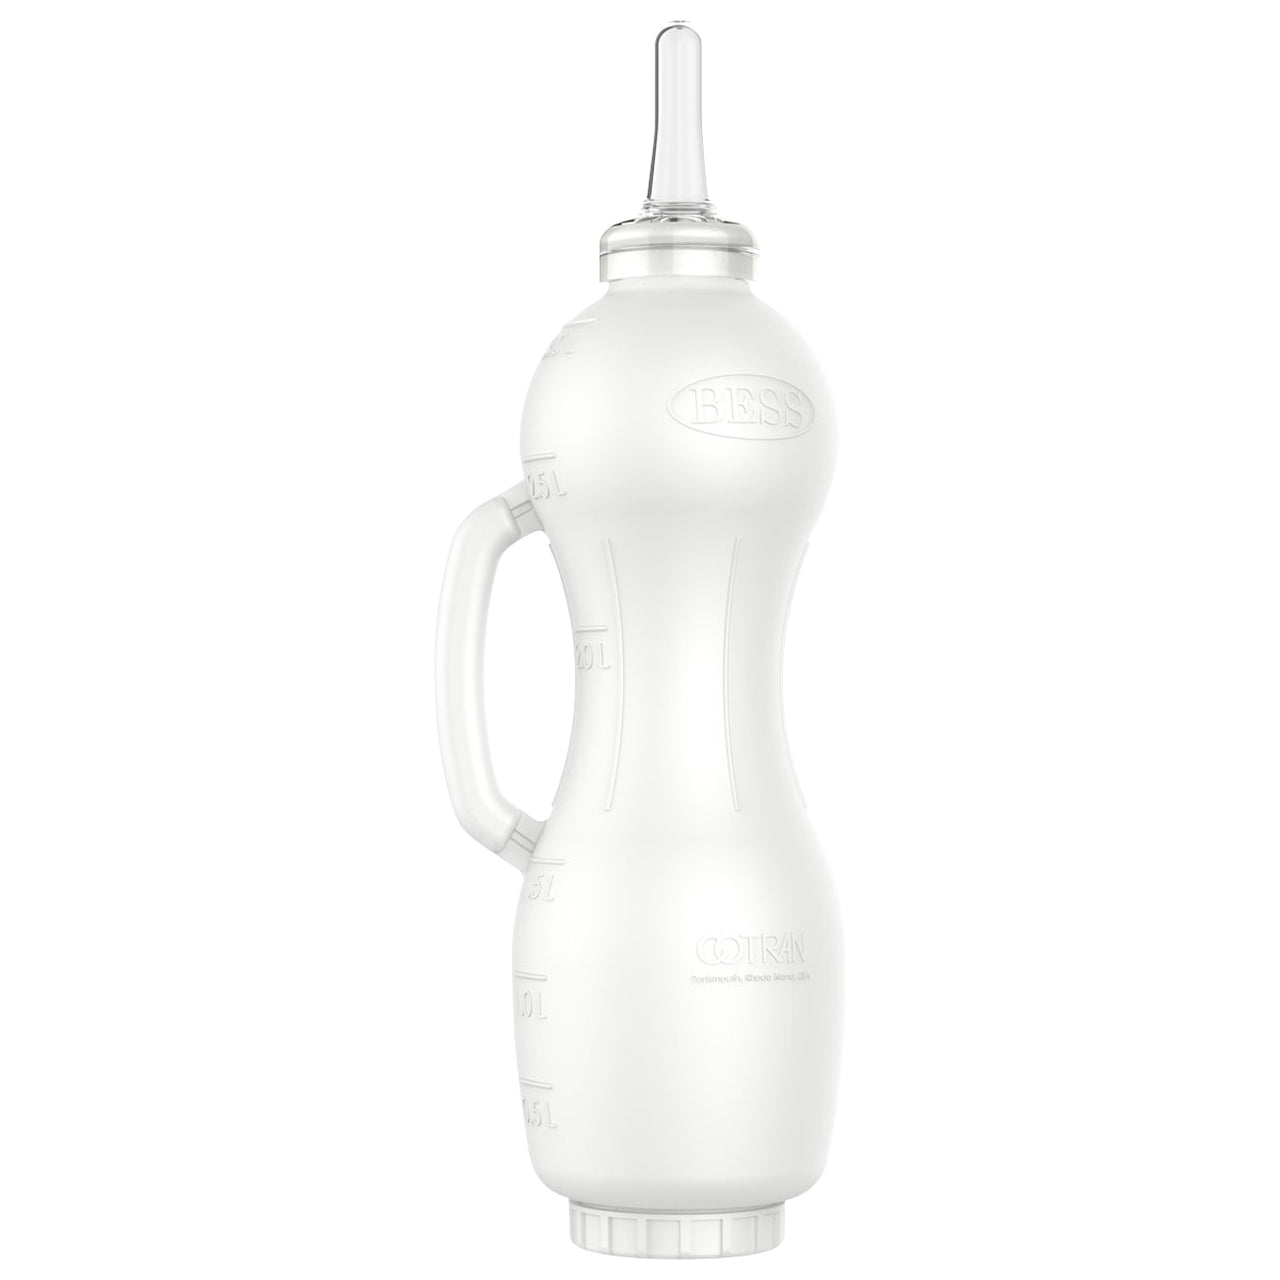 BESS Nursing Bottle with clear Snap- on nipple 3 QT